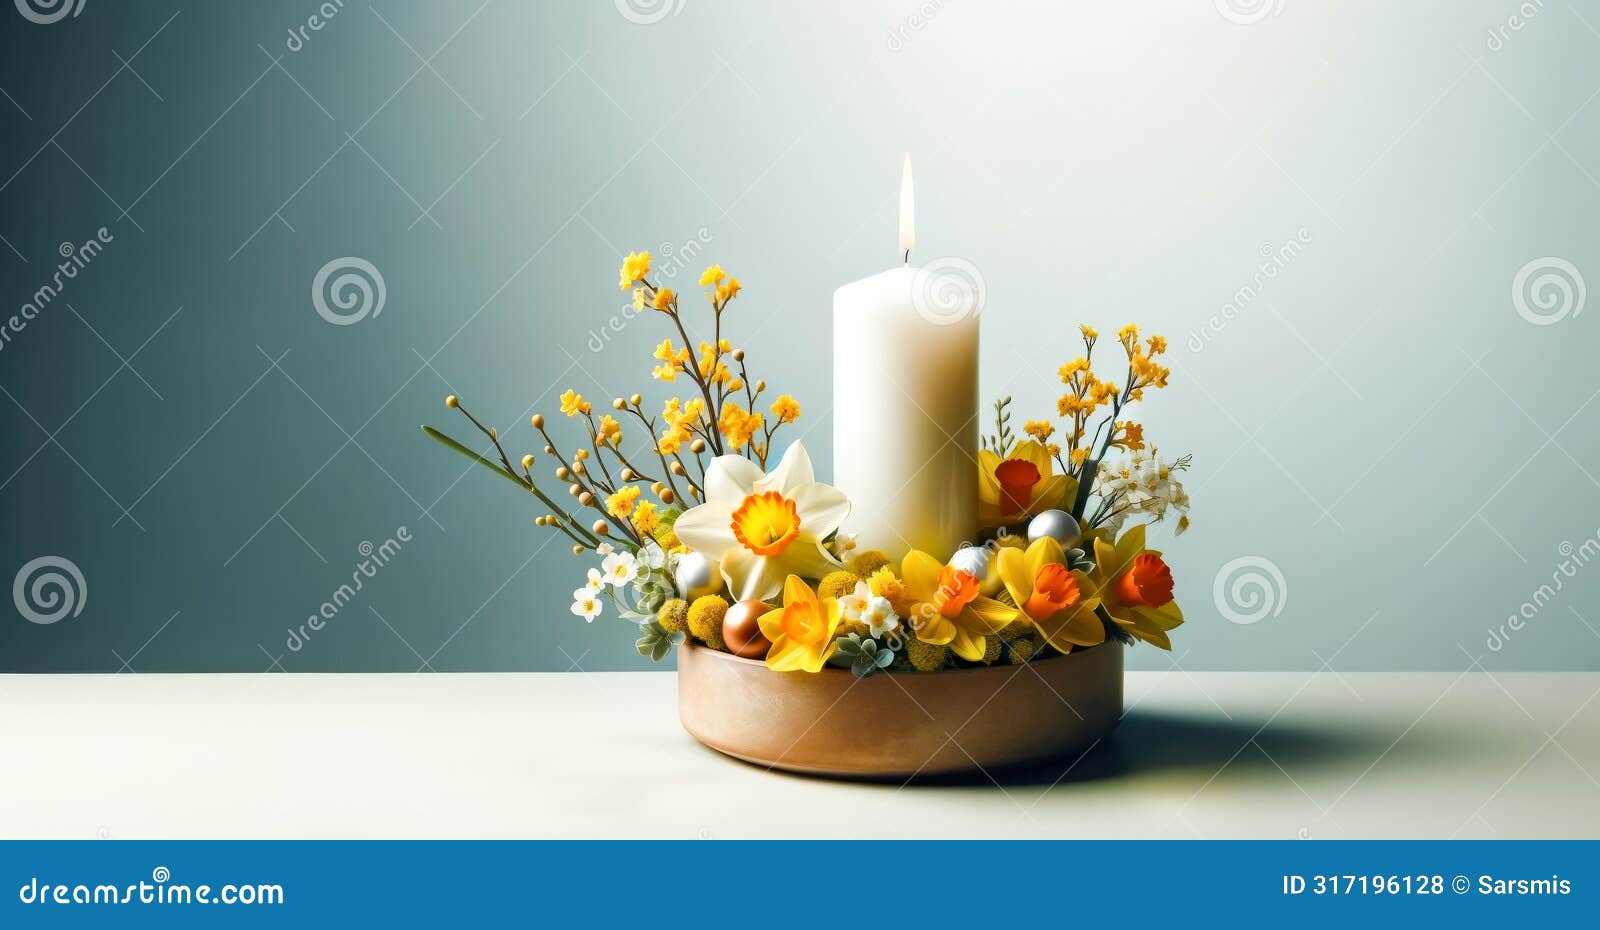 composition with scented candle in bowl surrounded by yellow daffodils flowers and spring blossom twigs.celebration spring